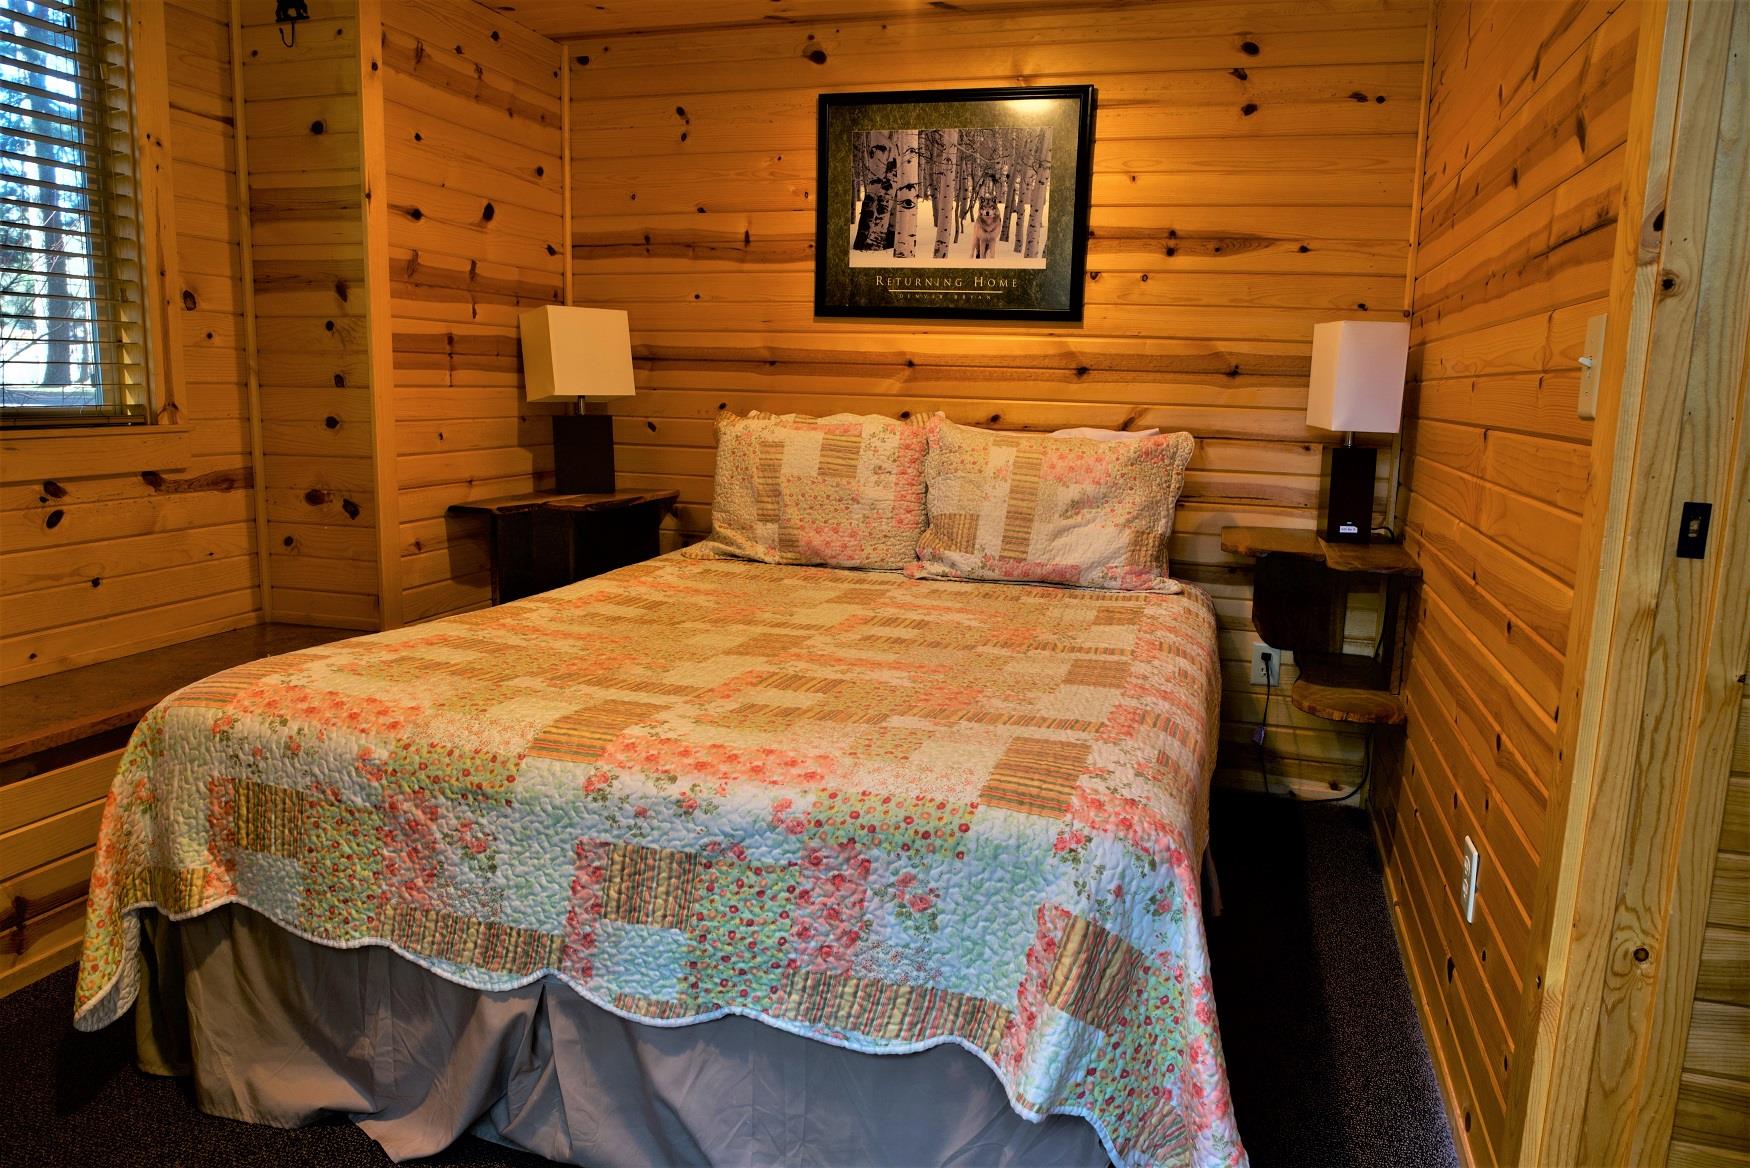 Get your best night sleep in the comfy queen bed in Ponderosa Cabin, at Cold Springs Resort & RV Park in Camp Sherman, Oregon